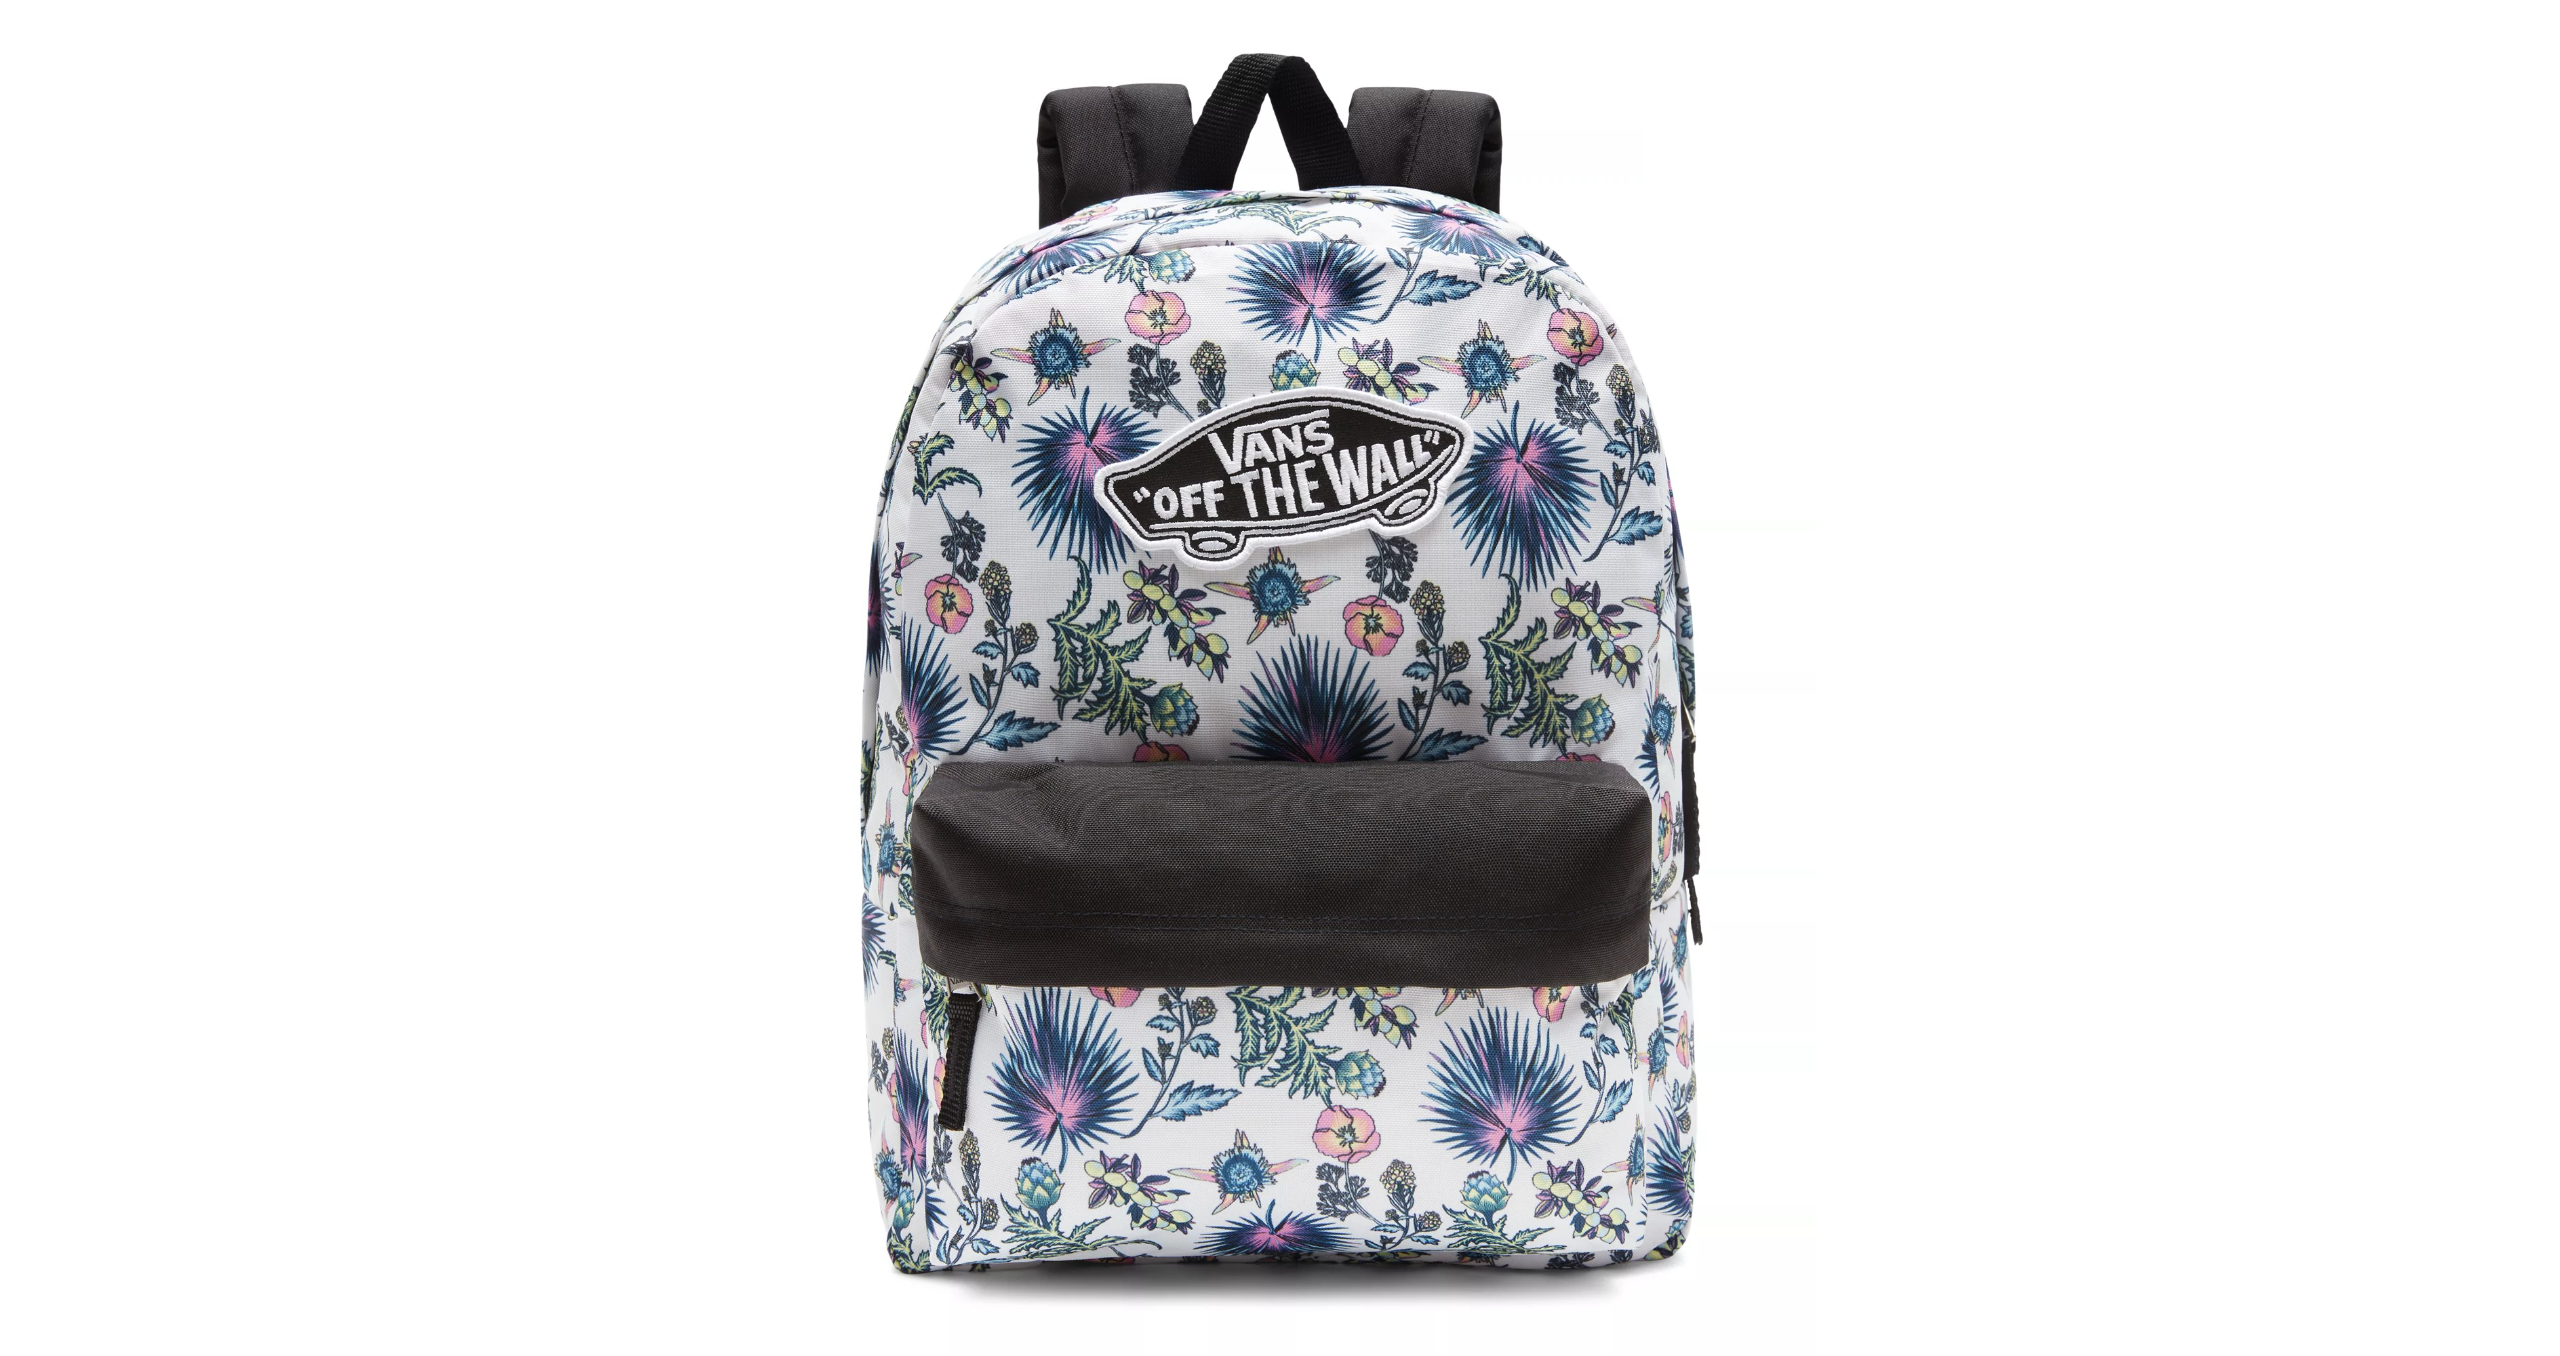 REALM BACKPACK CALIFAS MARSHMA VANS